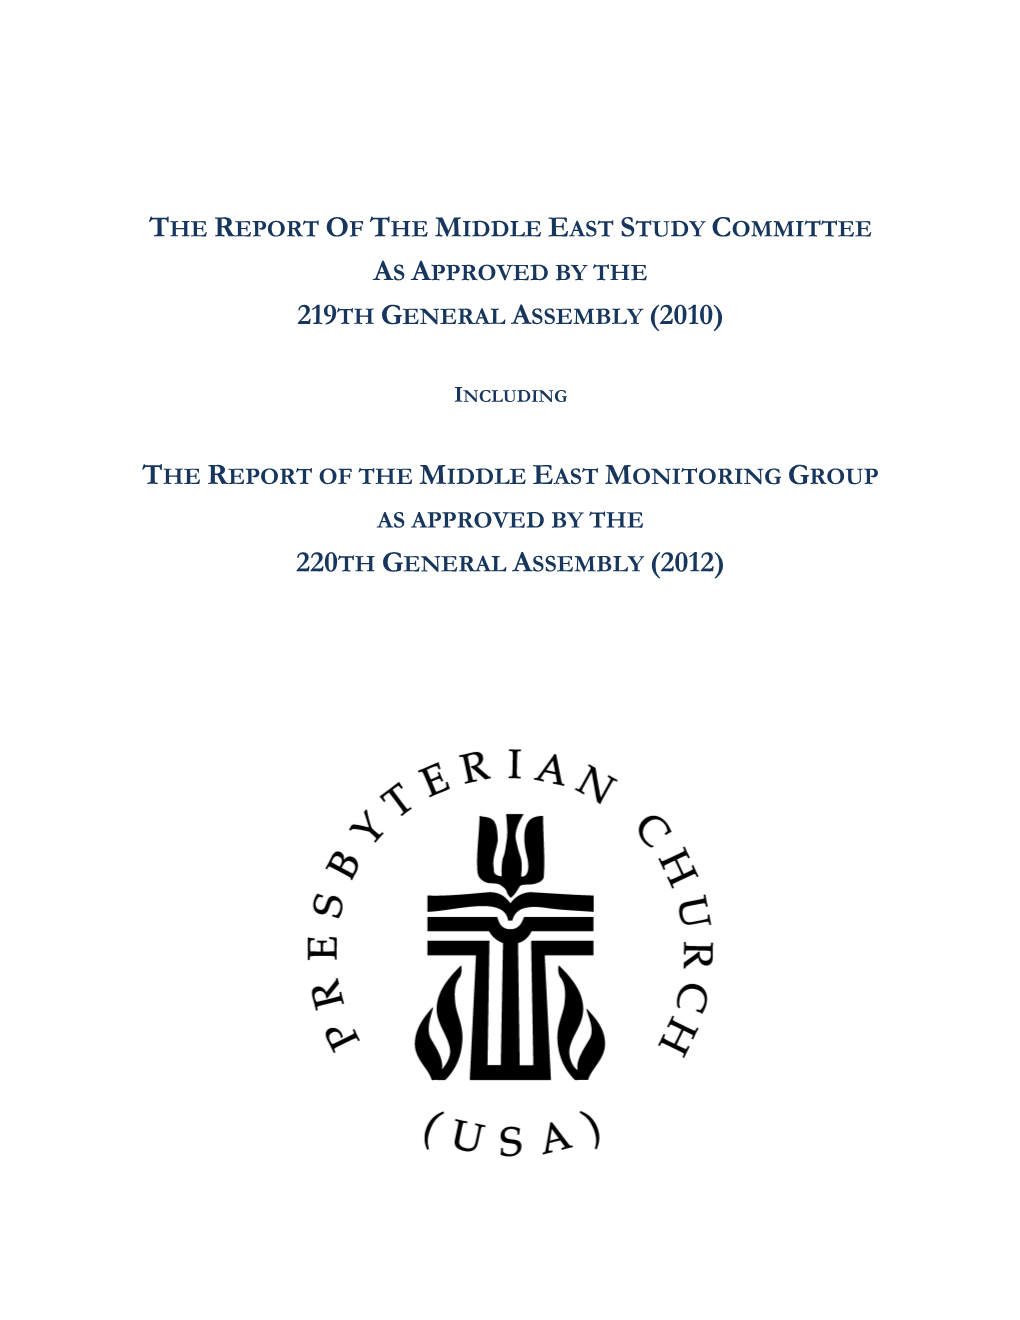 Reports of Middle East Study Committee (2010) and Middle East